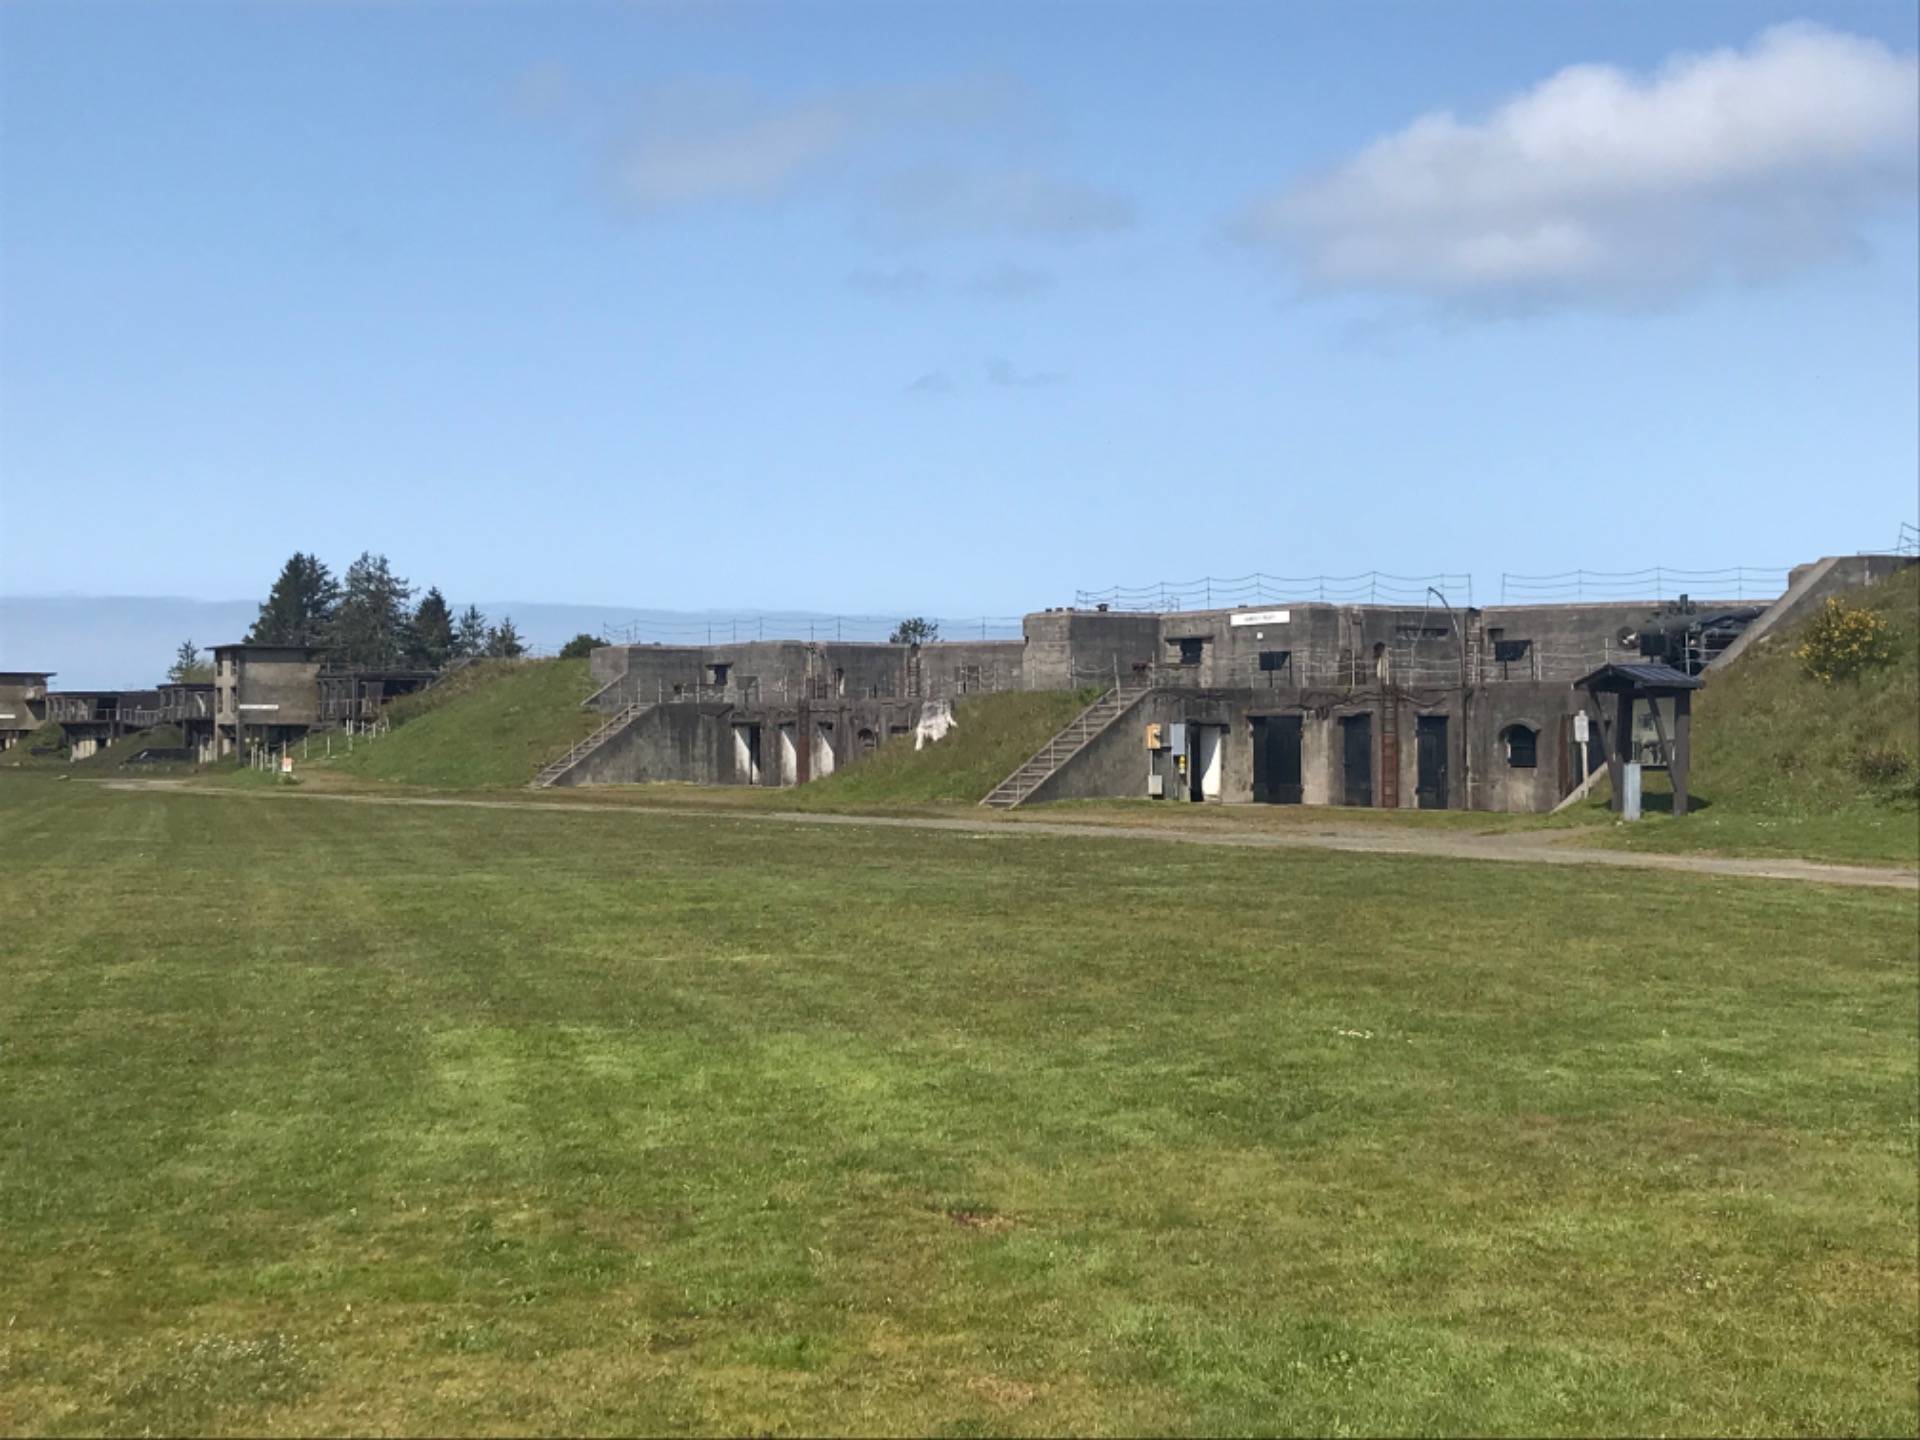 The fort. Little known fact, Fort Stevens was shelled by a Japanese submarine during WWII.